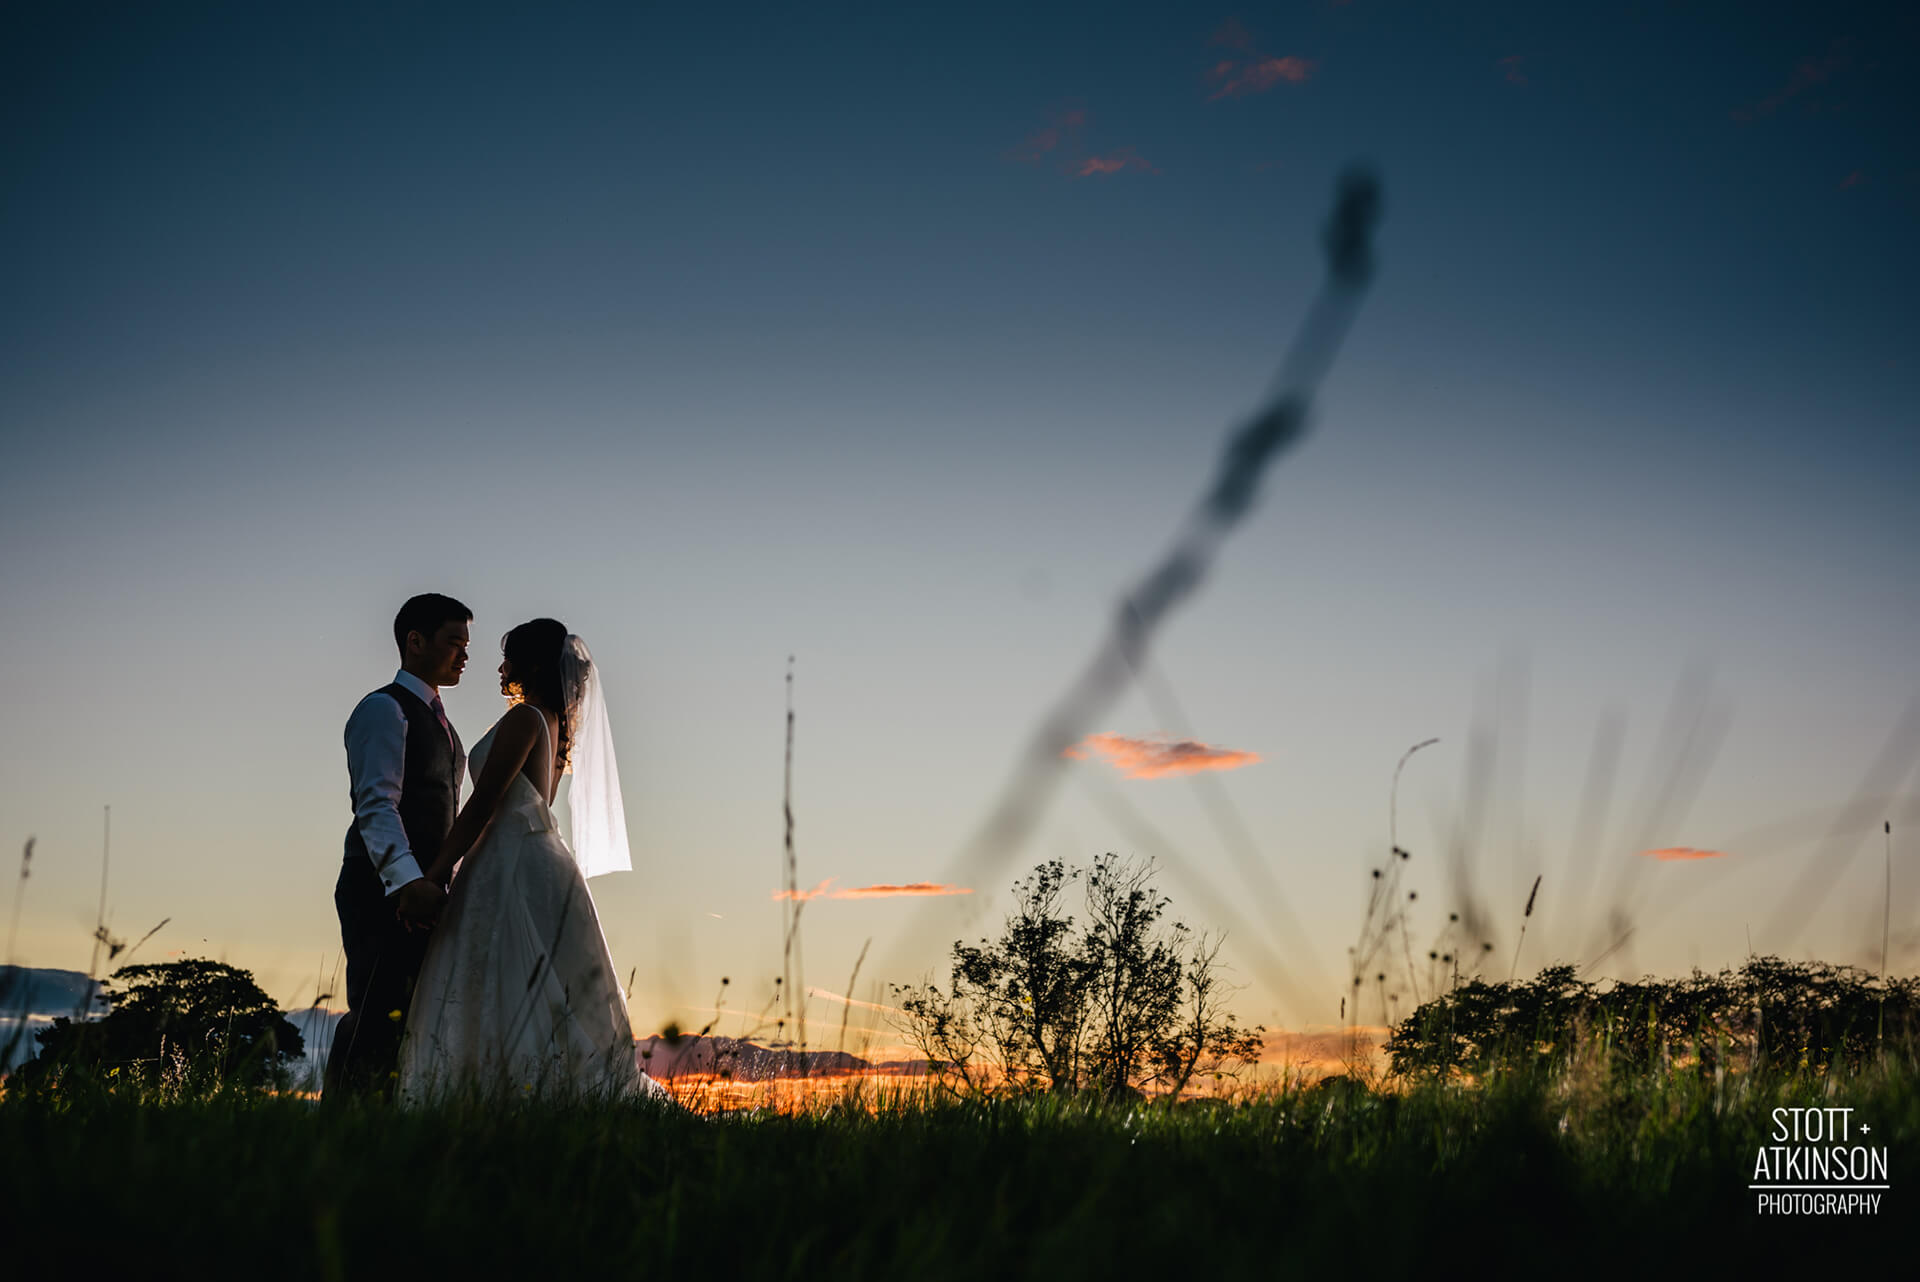 How amazing is this shot of Phil and Christine by <a href="http://www.stottandatkinson.com/" target="_blank">Stott and Atkinson</a>?